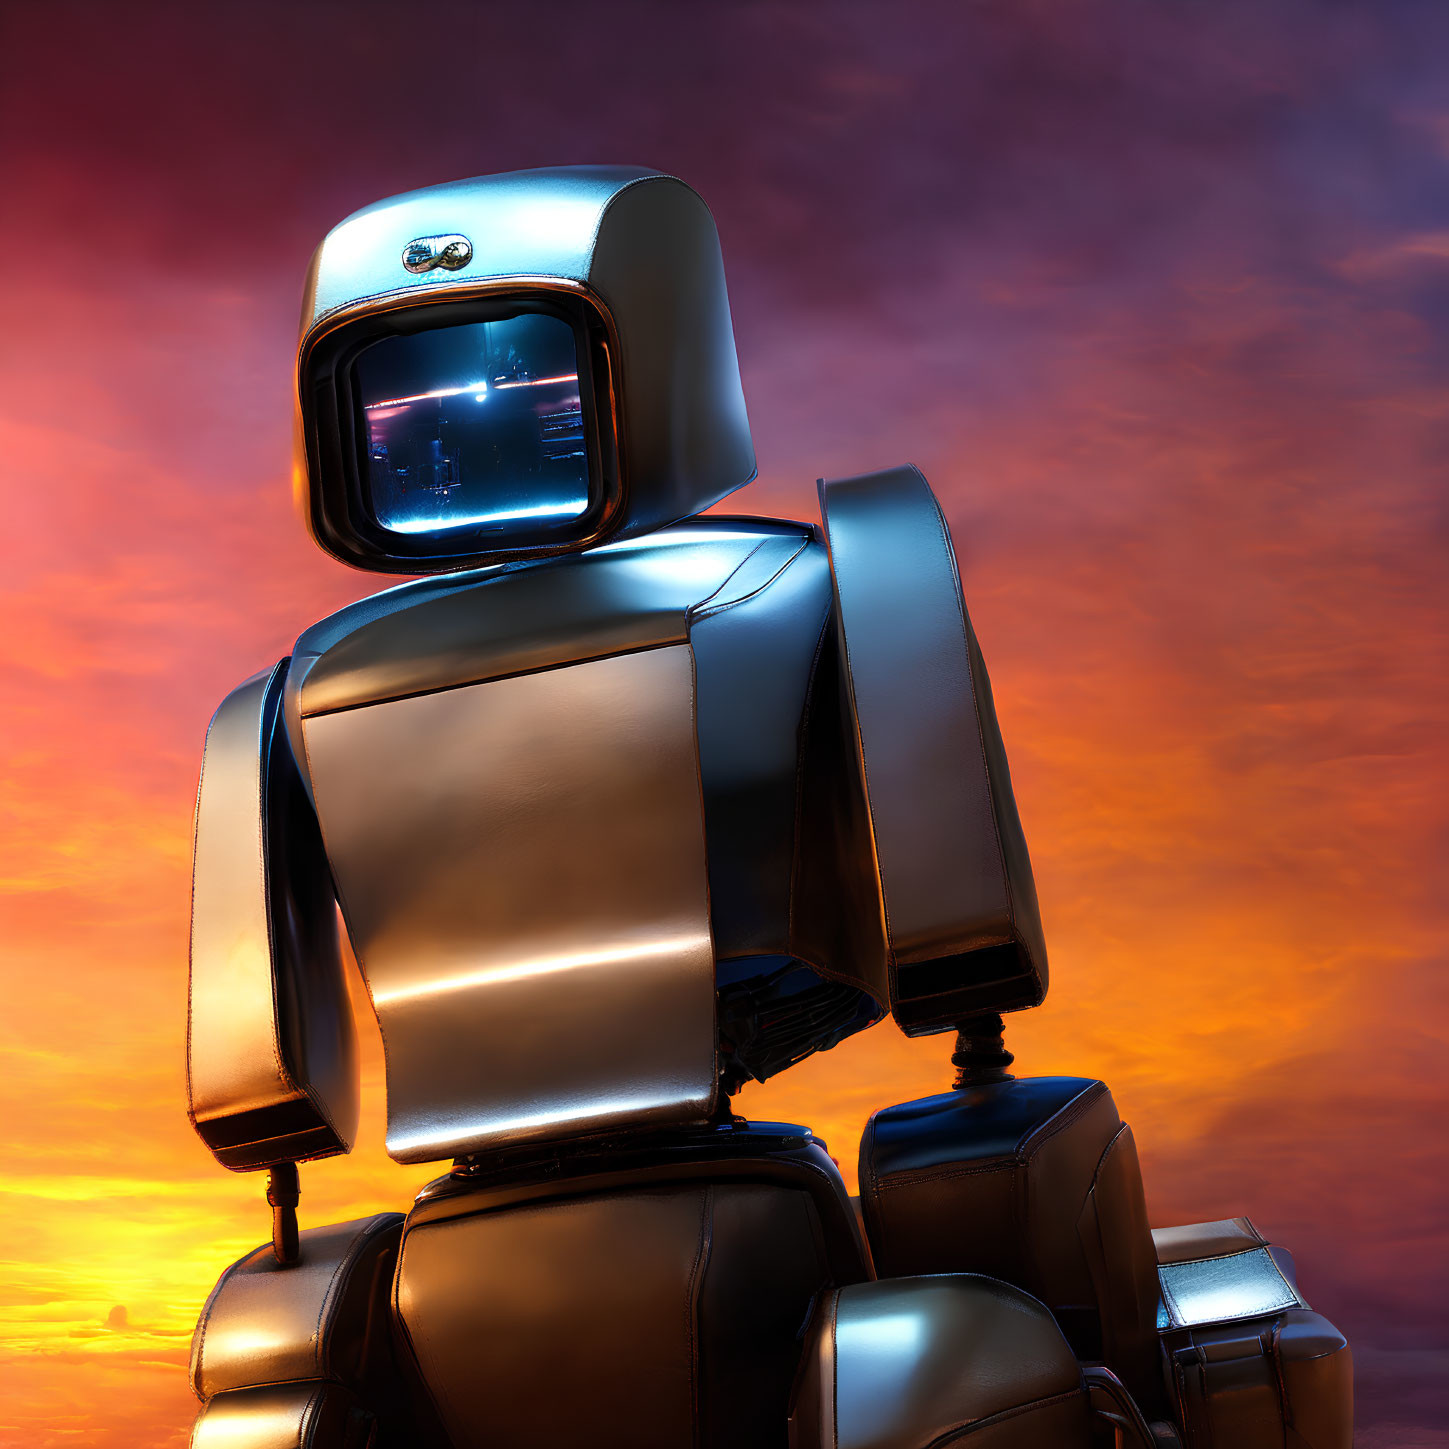 Futuristic robot with metallic body against dramatic sunset sky